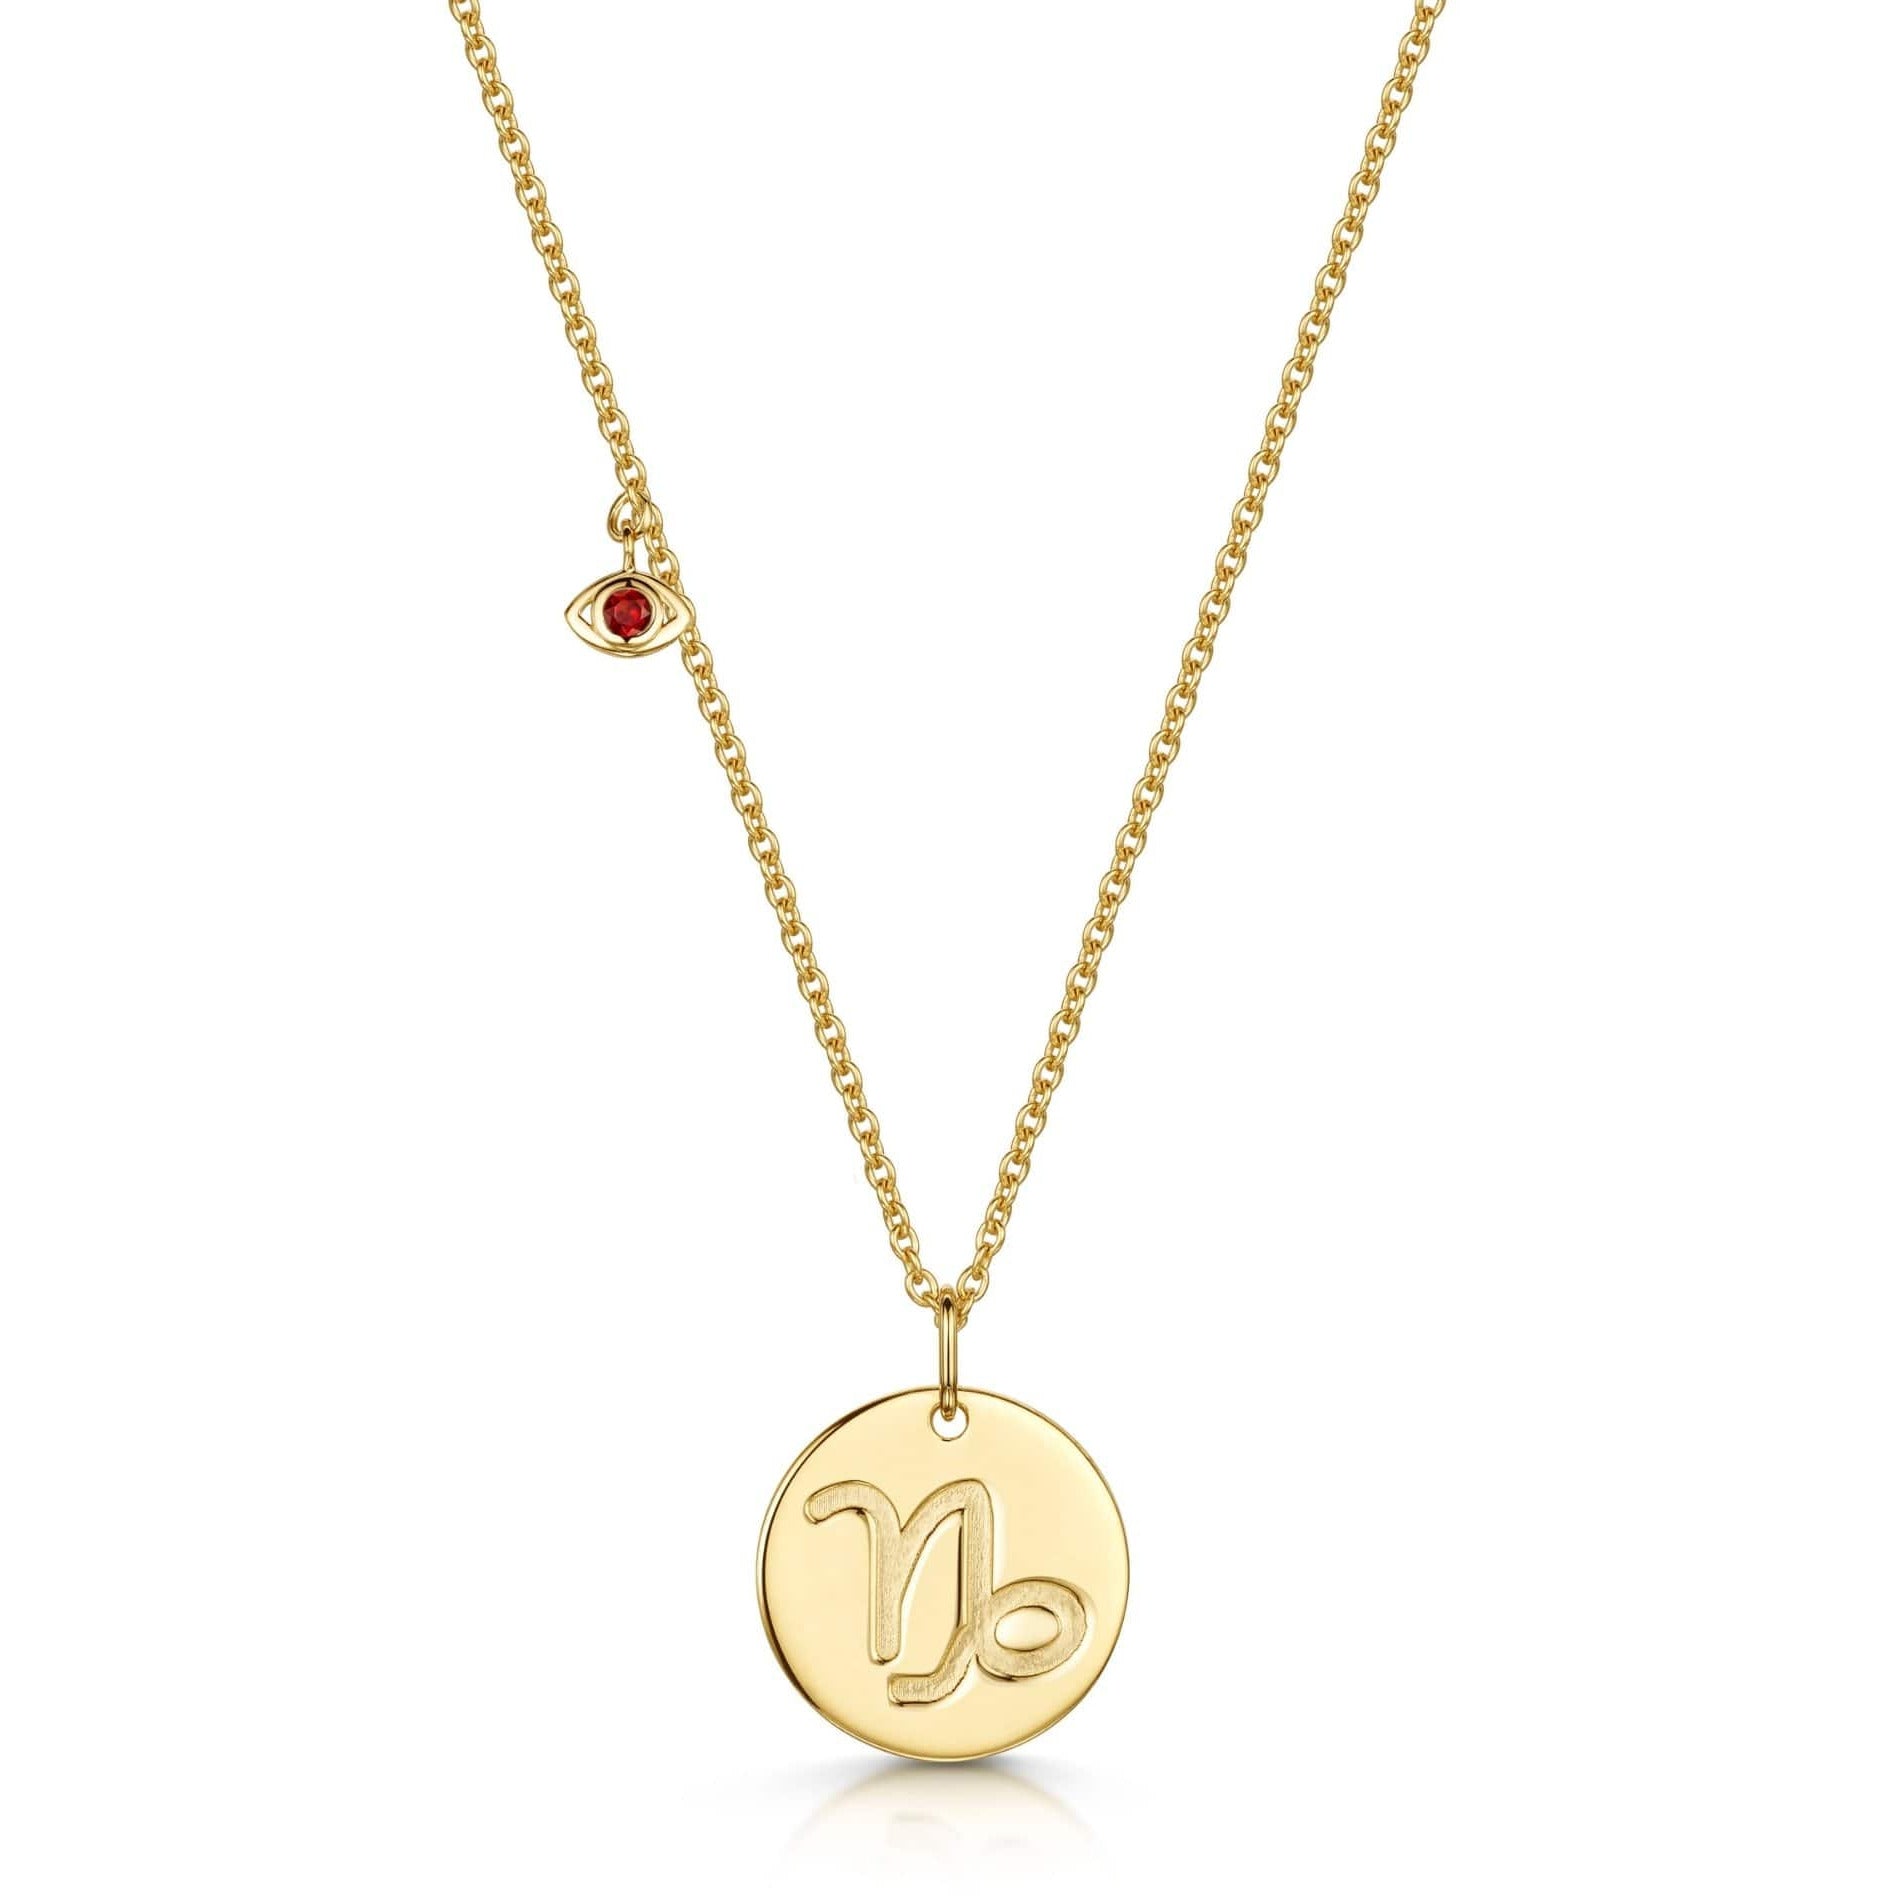 Fervor Montreal Necklace Capricorn Double-Sided Zodiac & Constellation Necklace